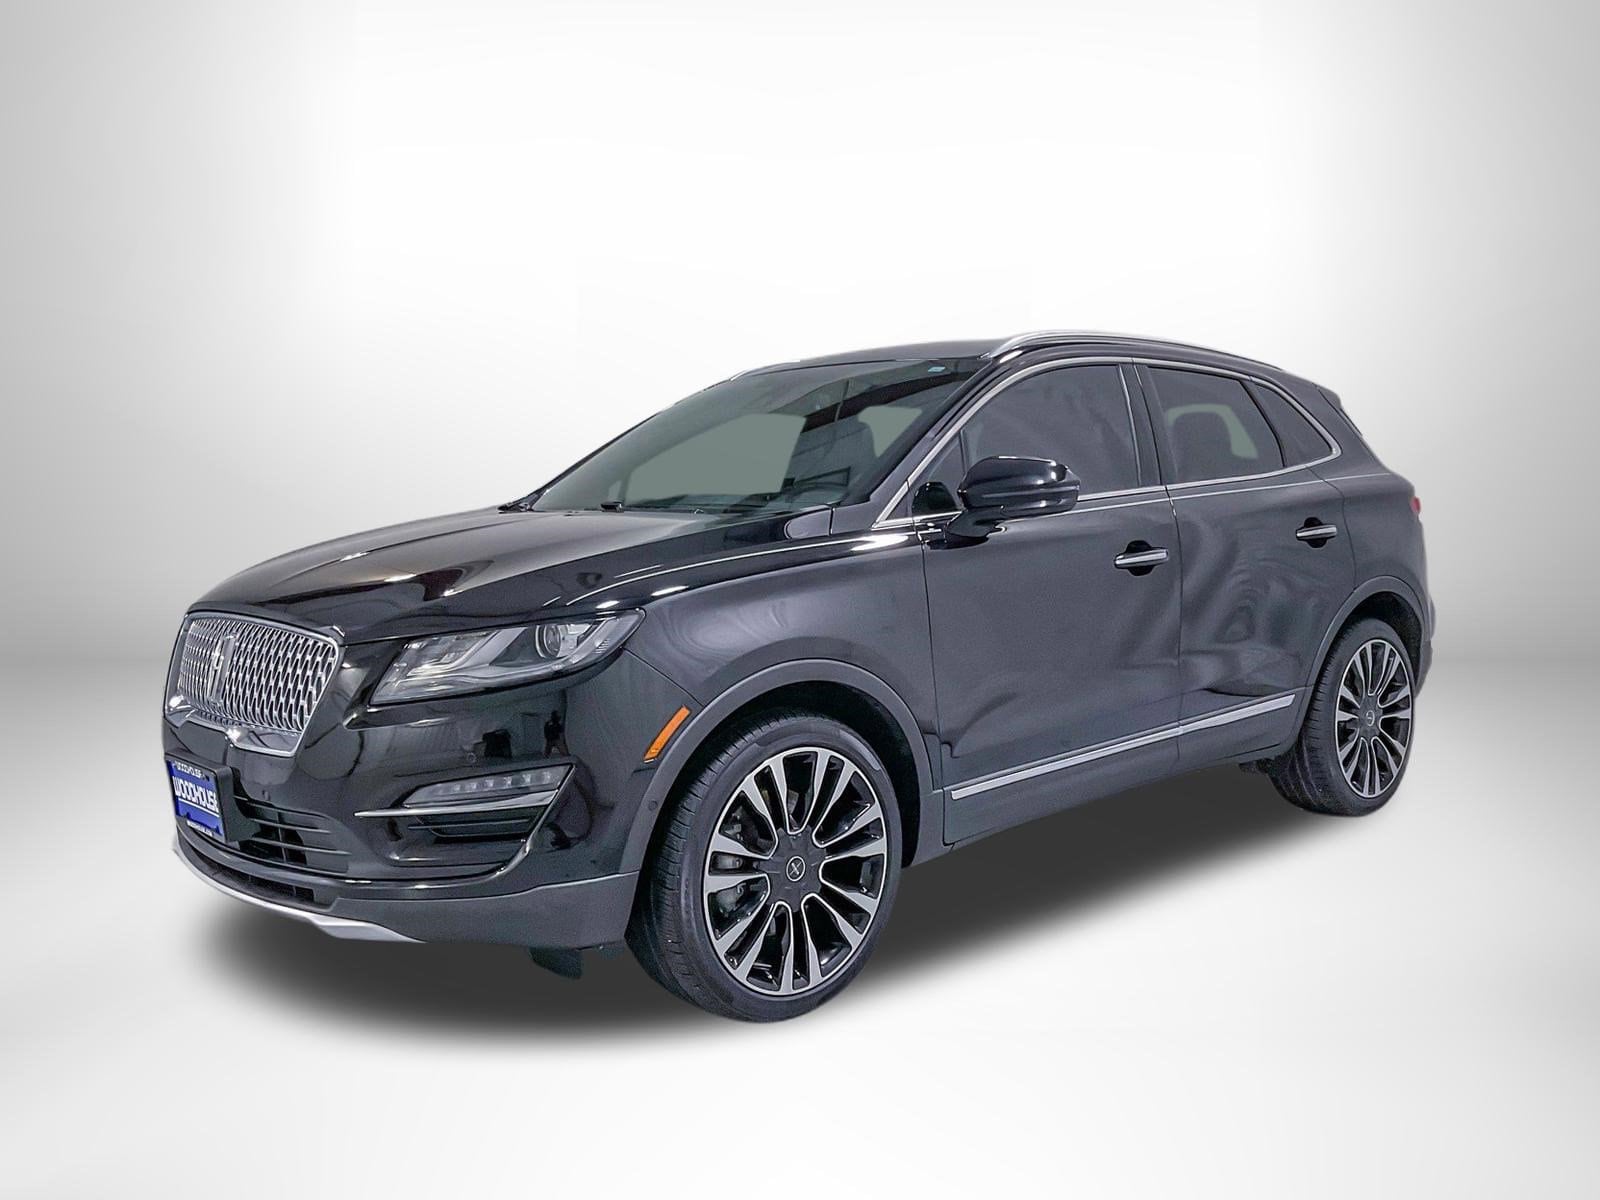 Used 2019 Lincoln MKC Black Label For Sale at Woodhouse Lincoln | VIN:  5LMTJ4DH0KUL09263